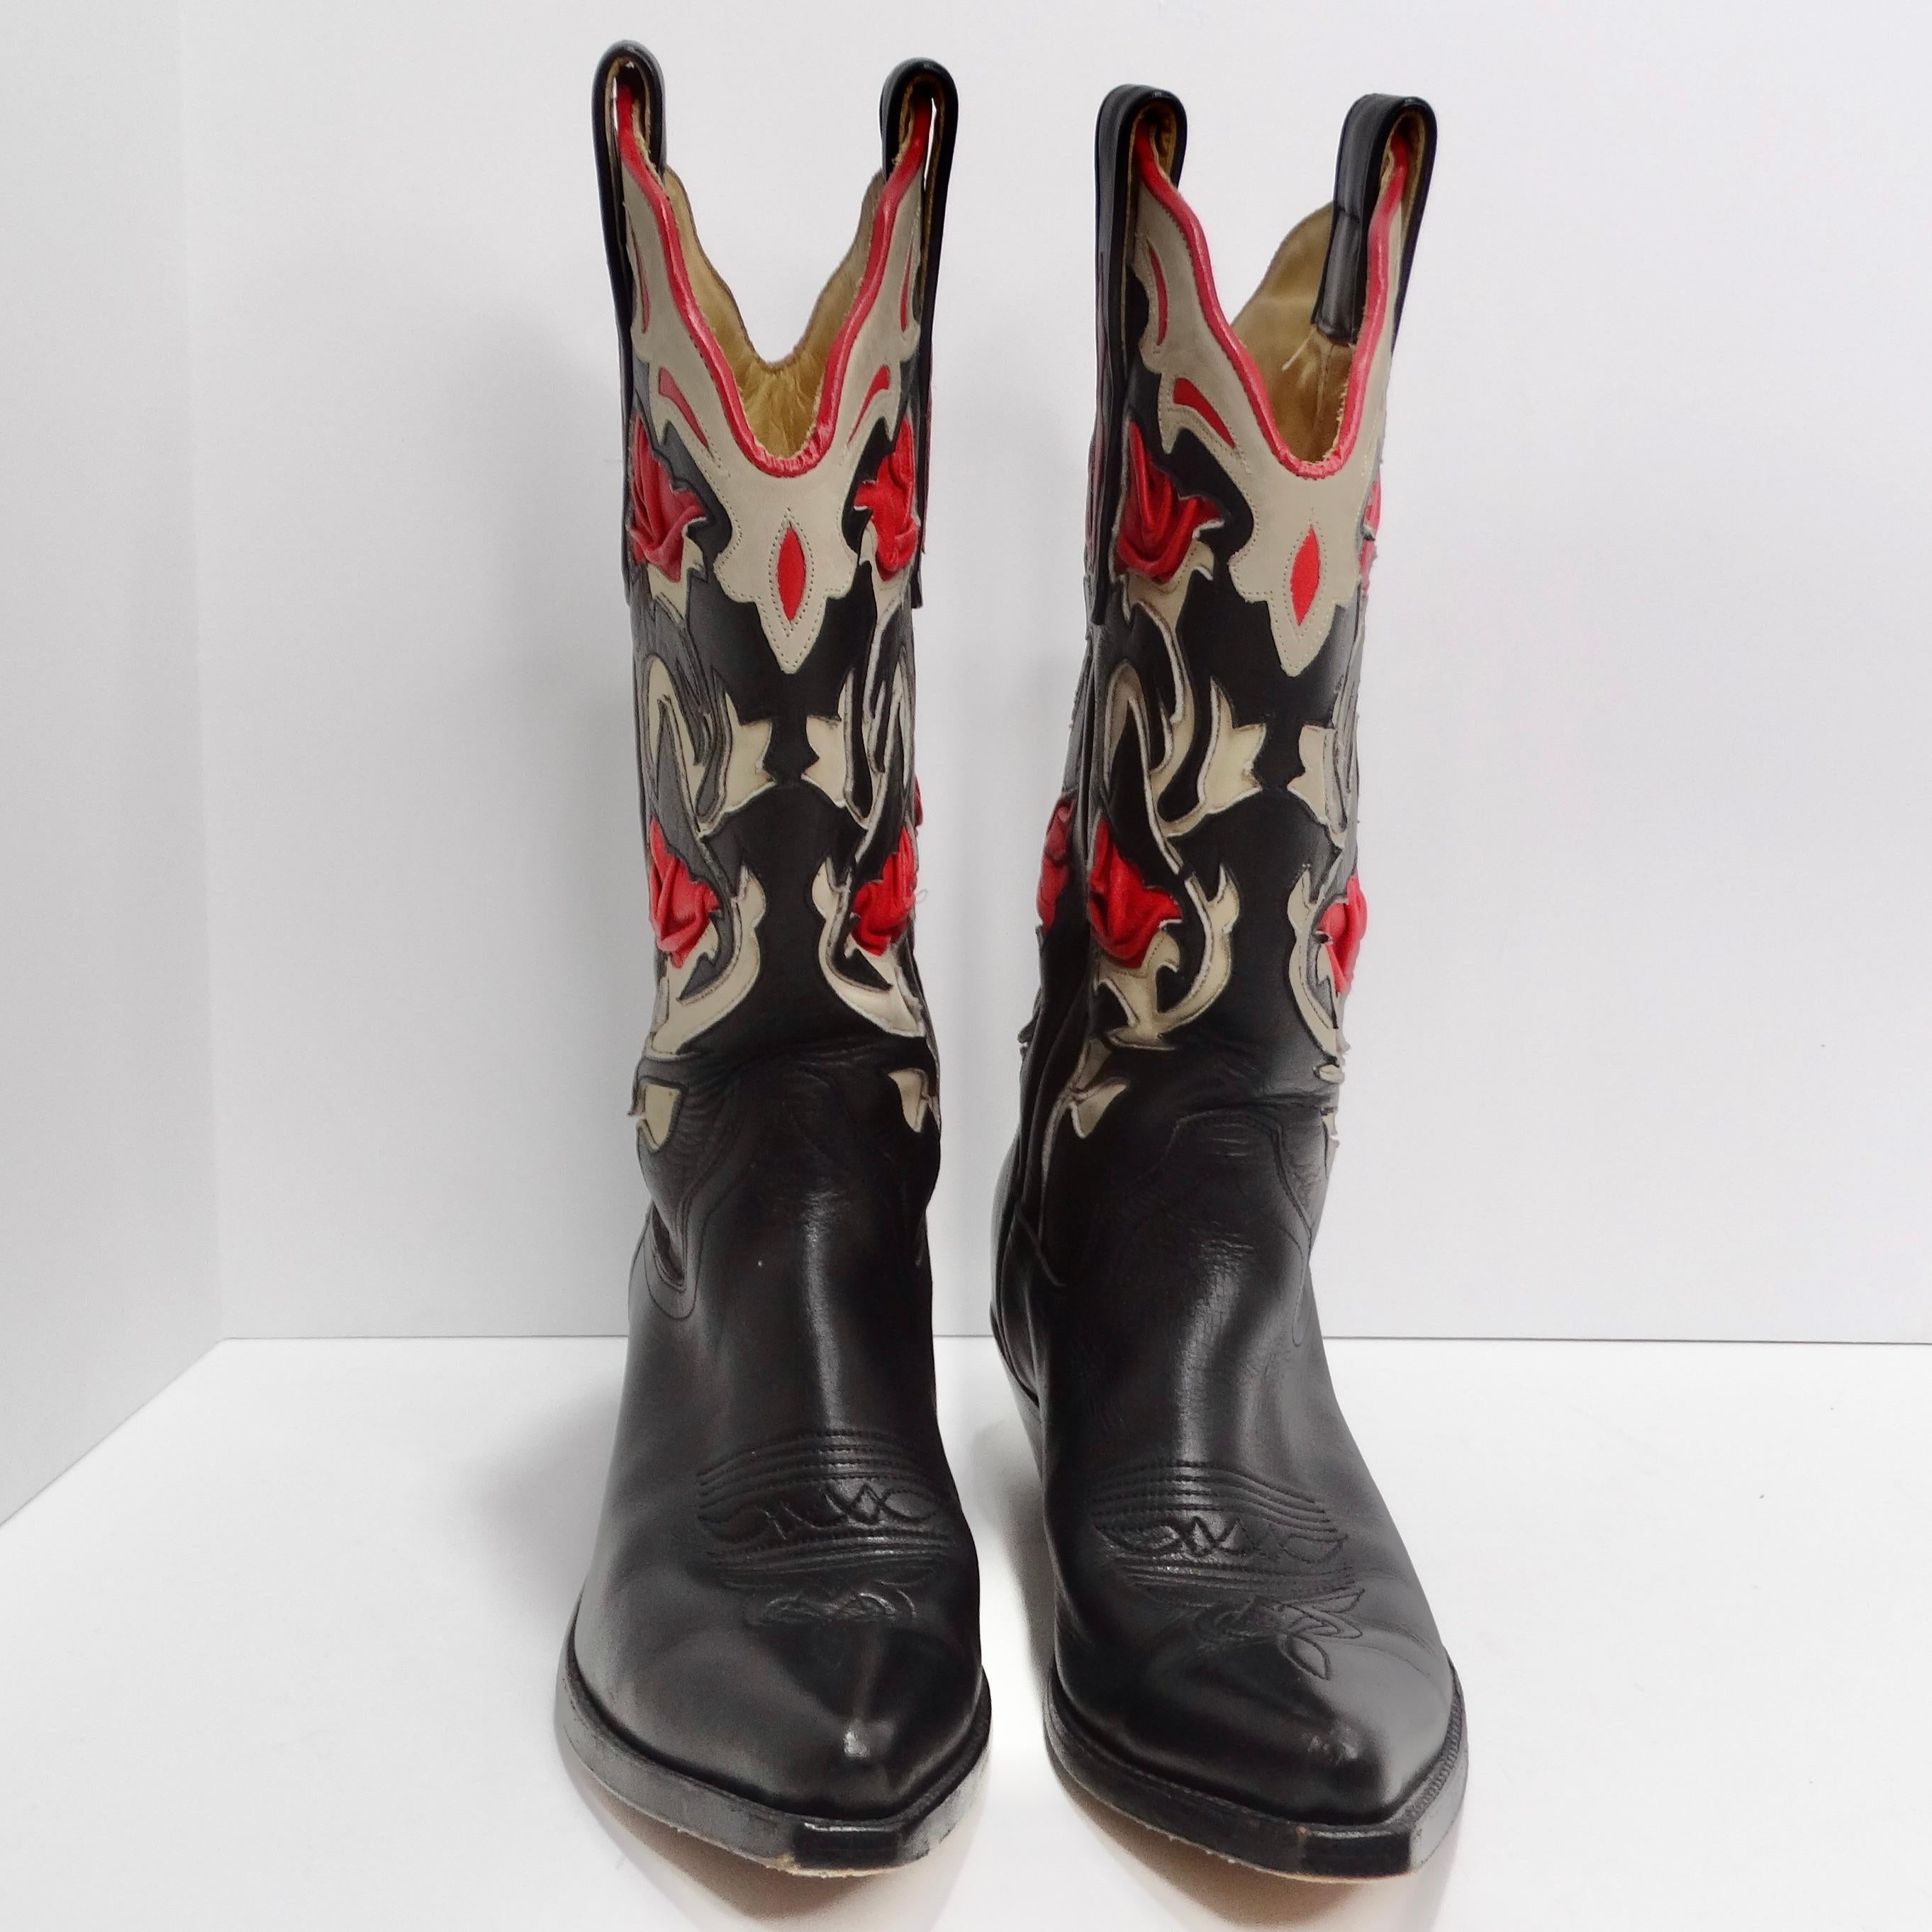 Introducing the Tony Mora Black and Red Leather Cowboy Boots, the epitome of classic Western style with a modern twist. These exquisite cowboy boots are a perfect blend of tradition and contemporary fashion, making them a must-have for anyone who